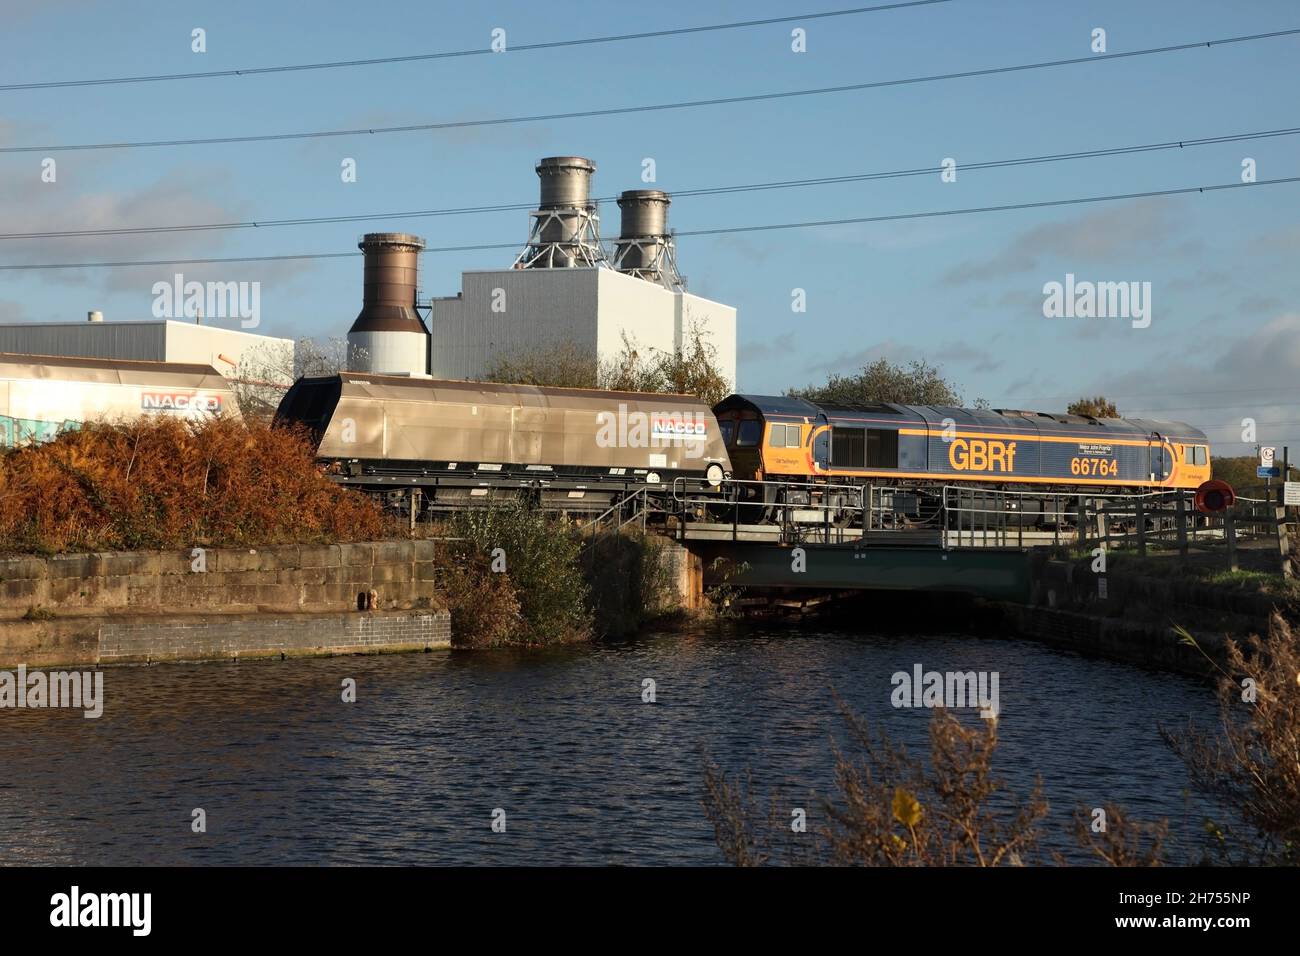 GB Railfreight Class 66 loco 66764 crosses the Stainforth and Keadby canal with the 6L40 0954 Hunslet Tilcon to Scunthorpe service on 17/11/21. Stock Photo